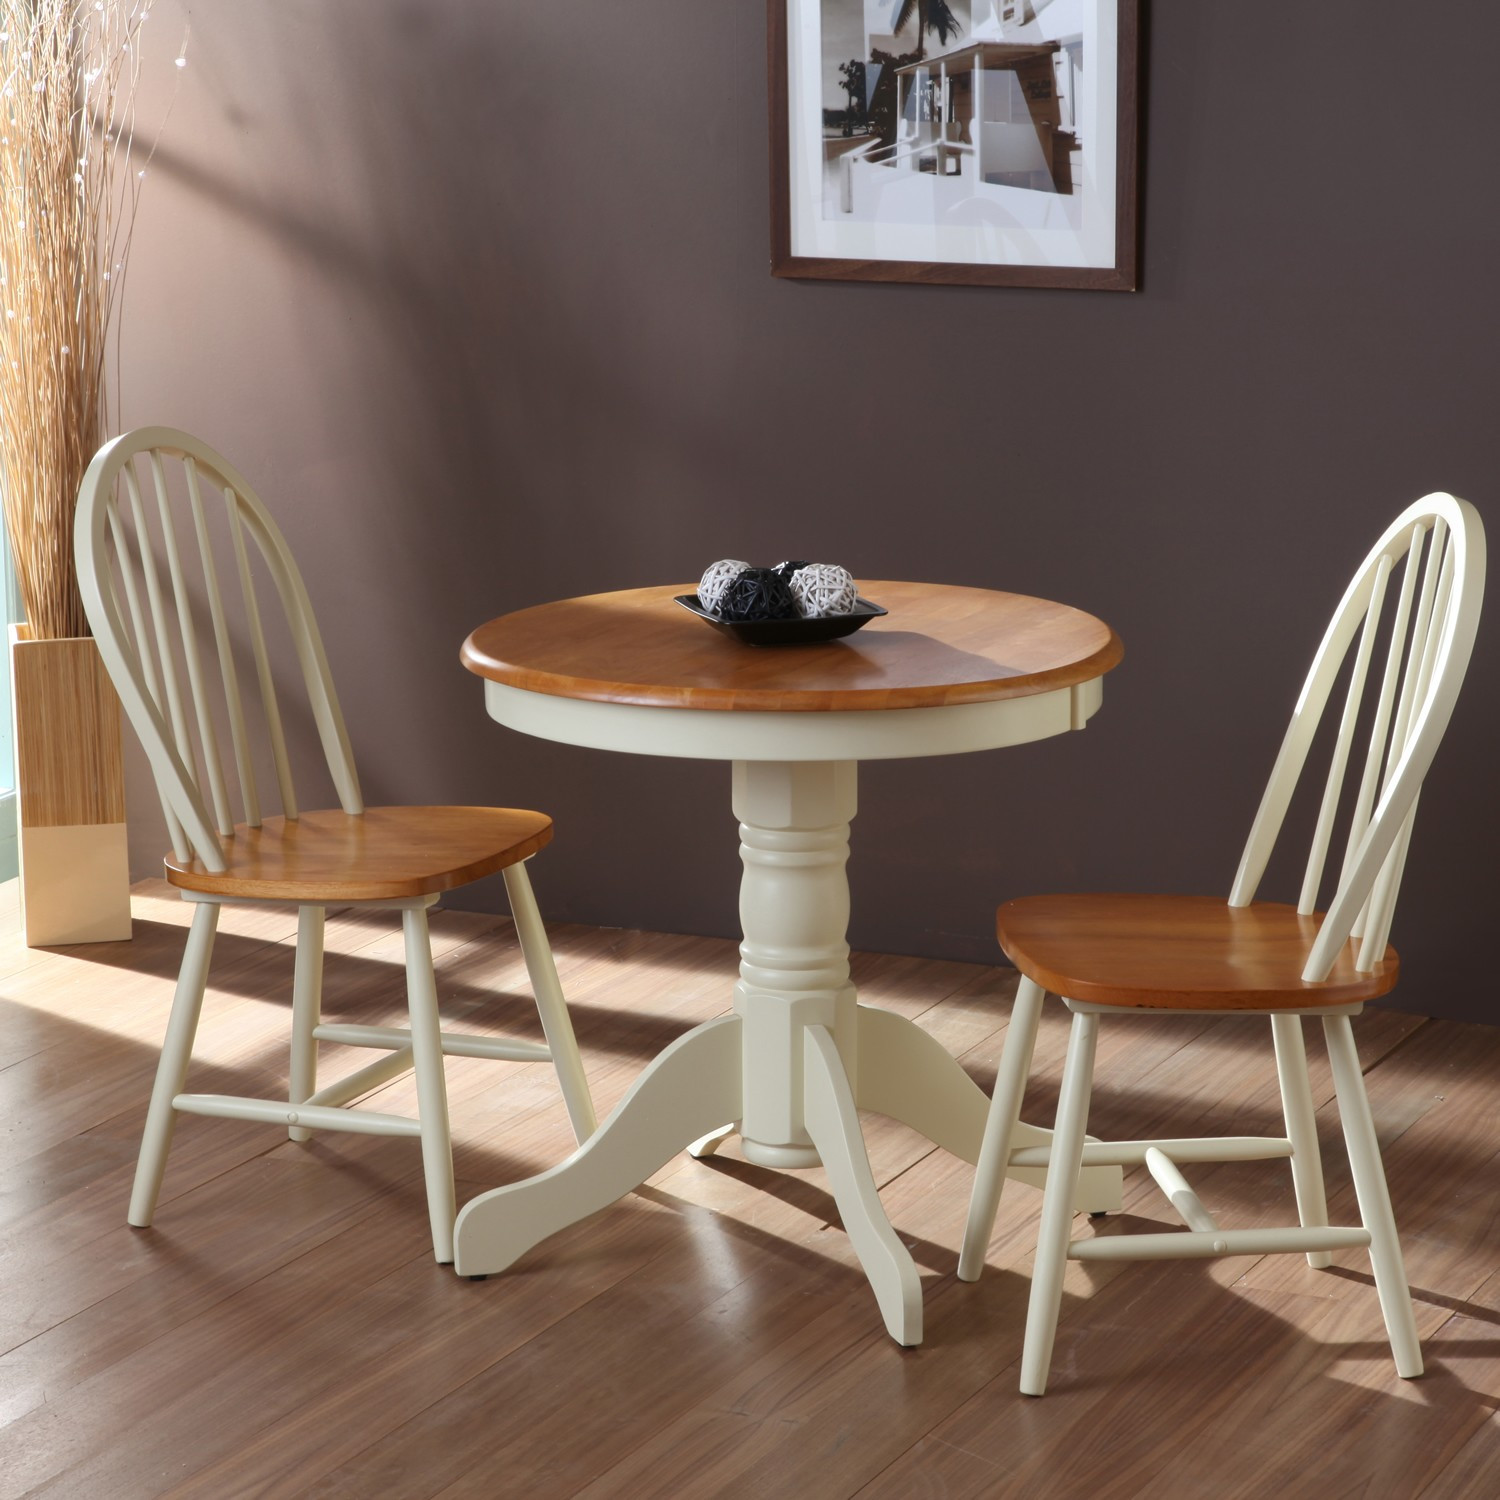 Small Round Kitchen Table Set
 Beautiful White Round Kitchen Table and Chairs